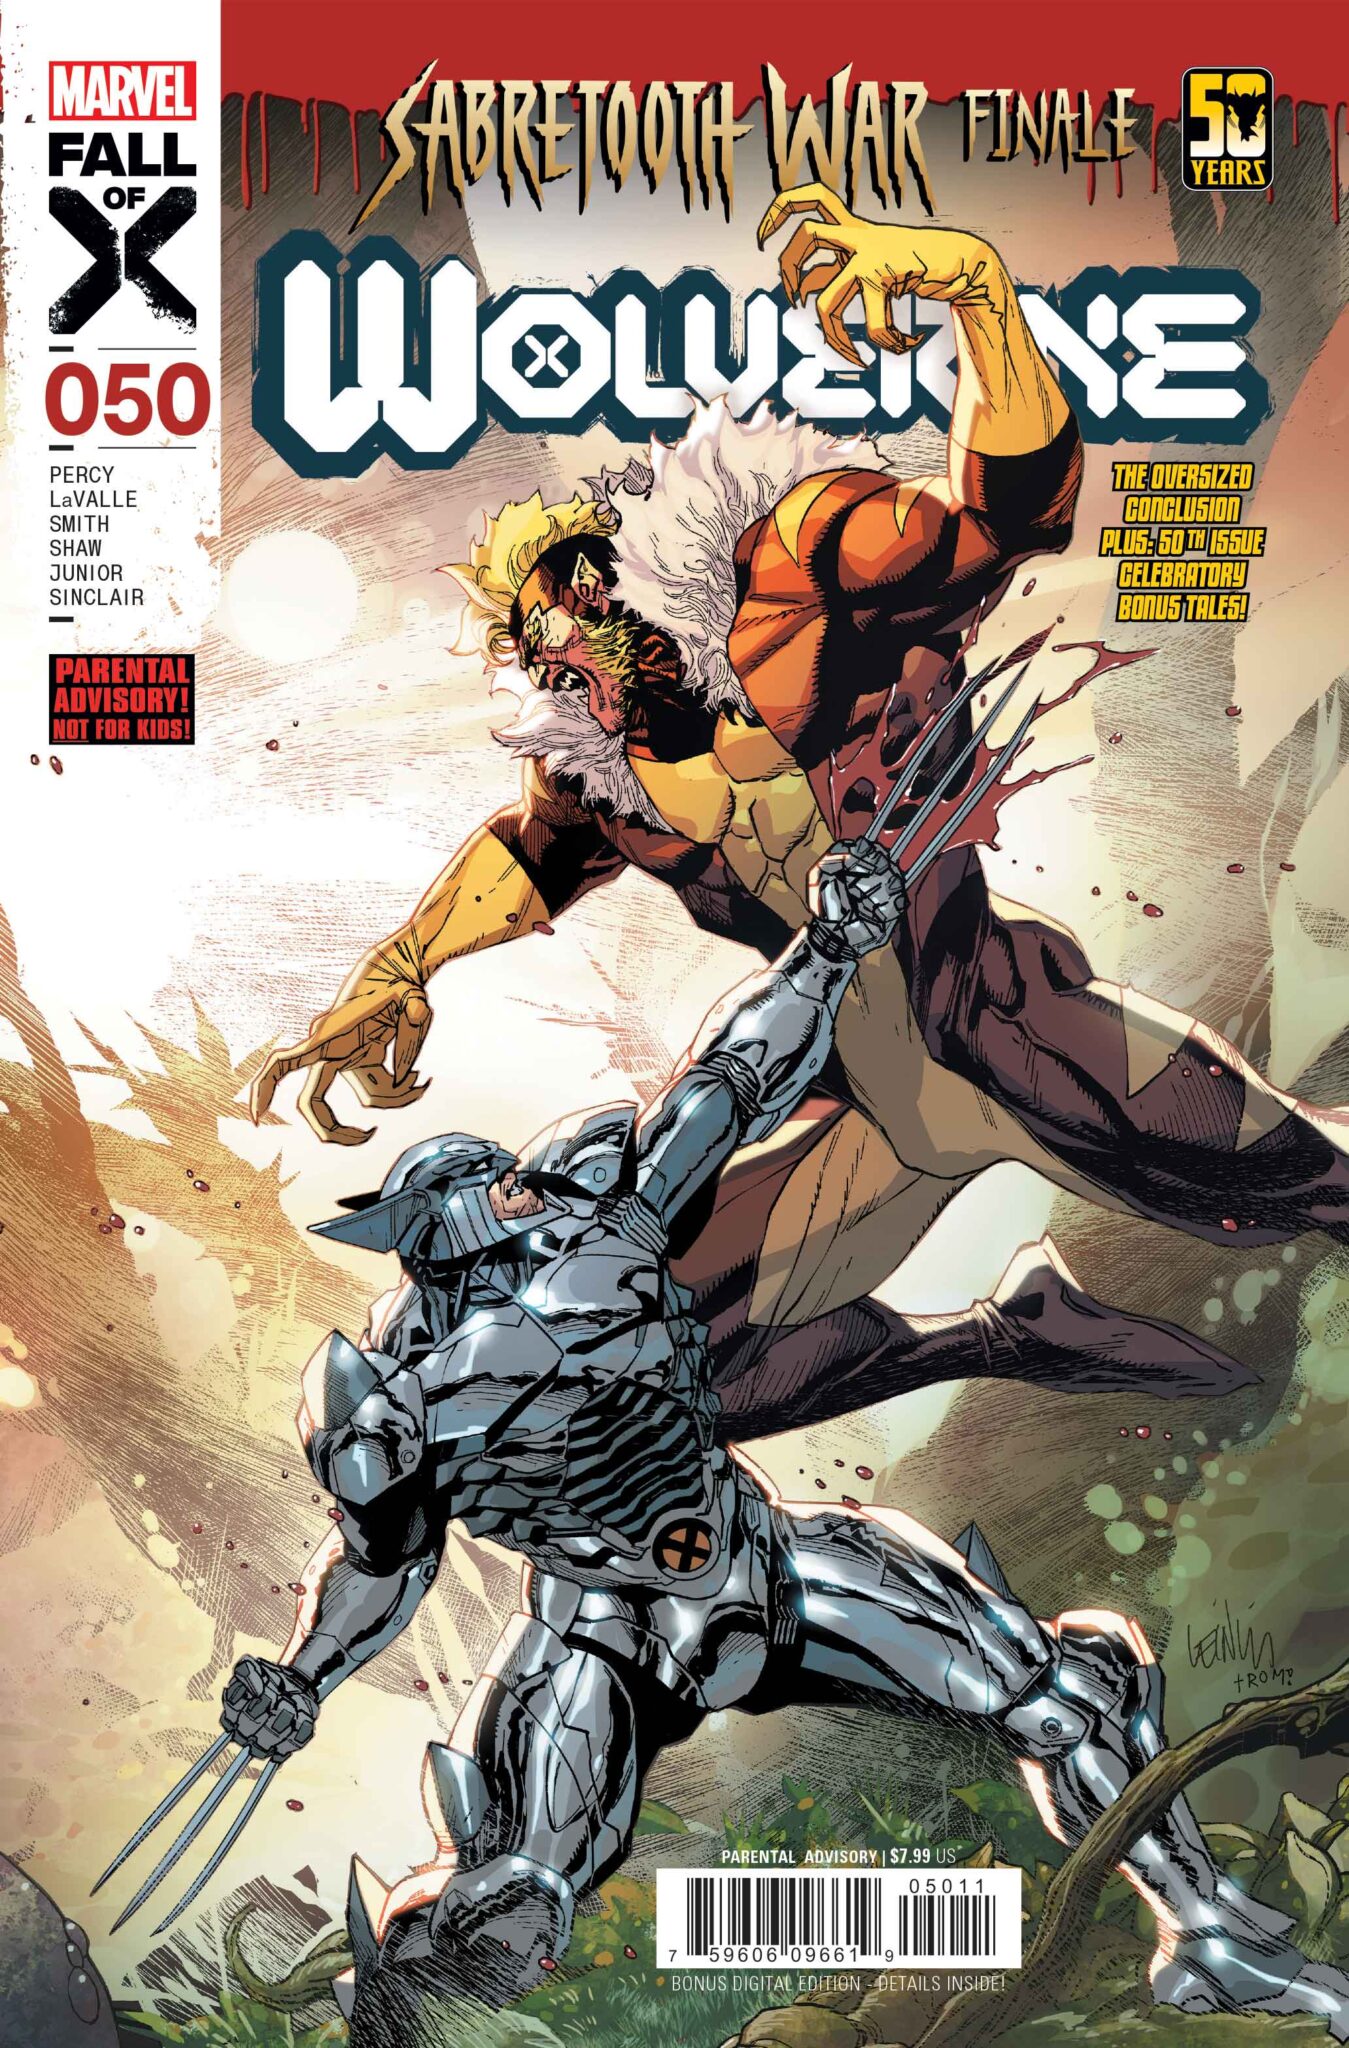 Wolverine #5 cover